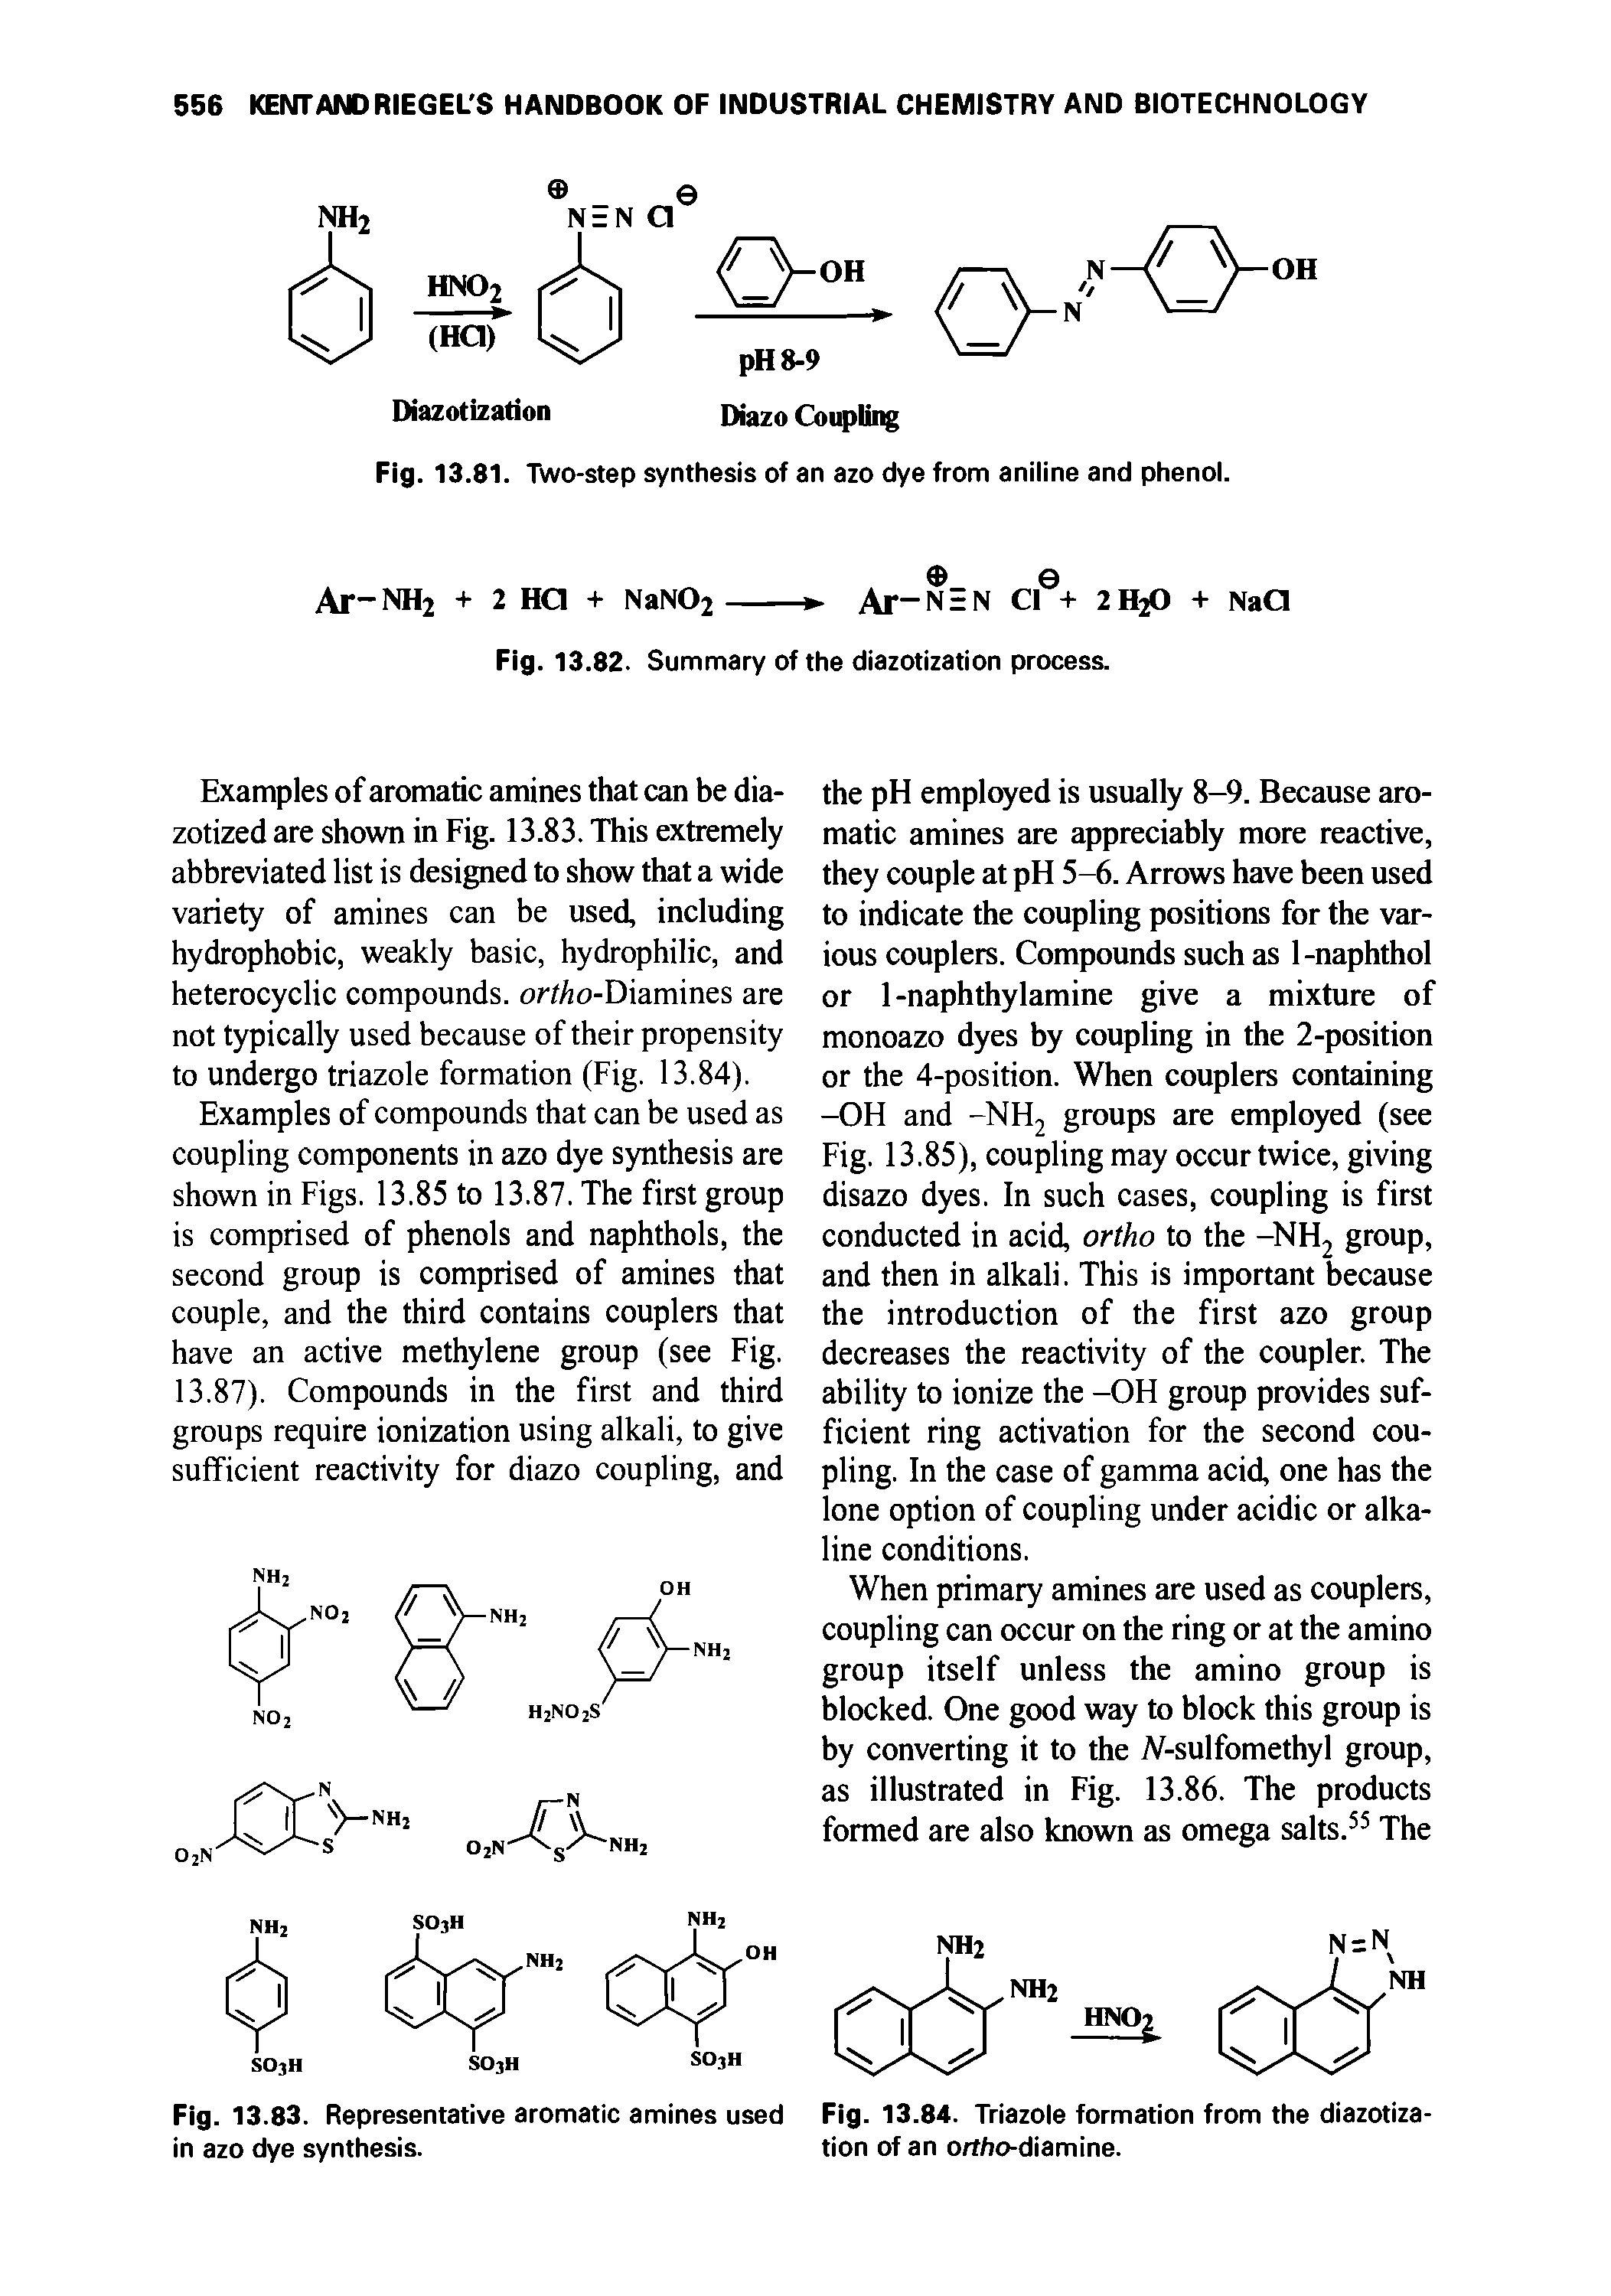 Fig. 13.83. Representative aromatic amines used Fig. 13.84. Triazole formation from the diazotiza-in azo dye synthesis. tion of an ortho-diamine.